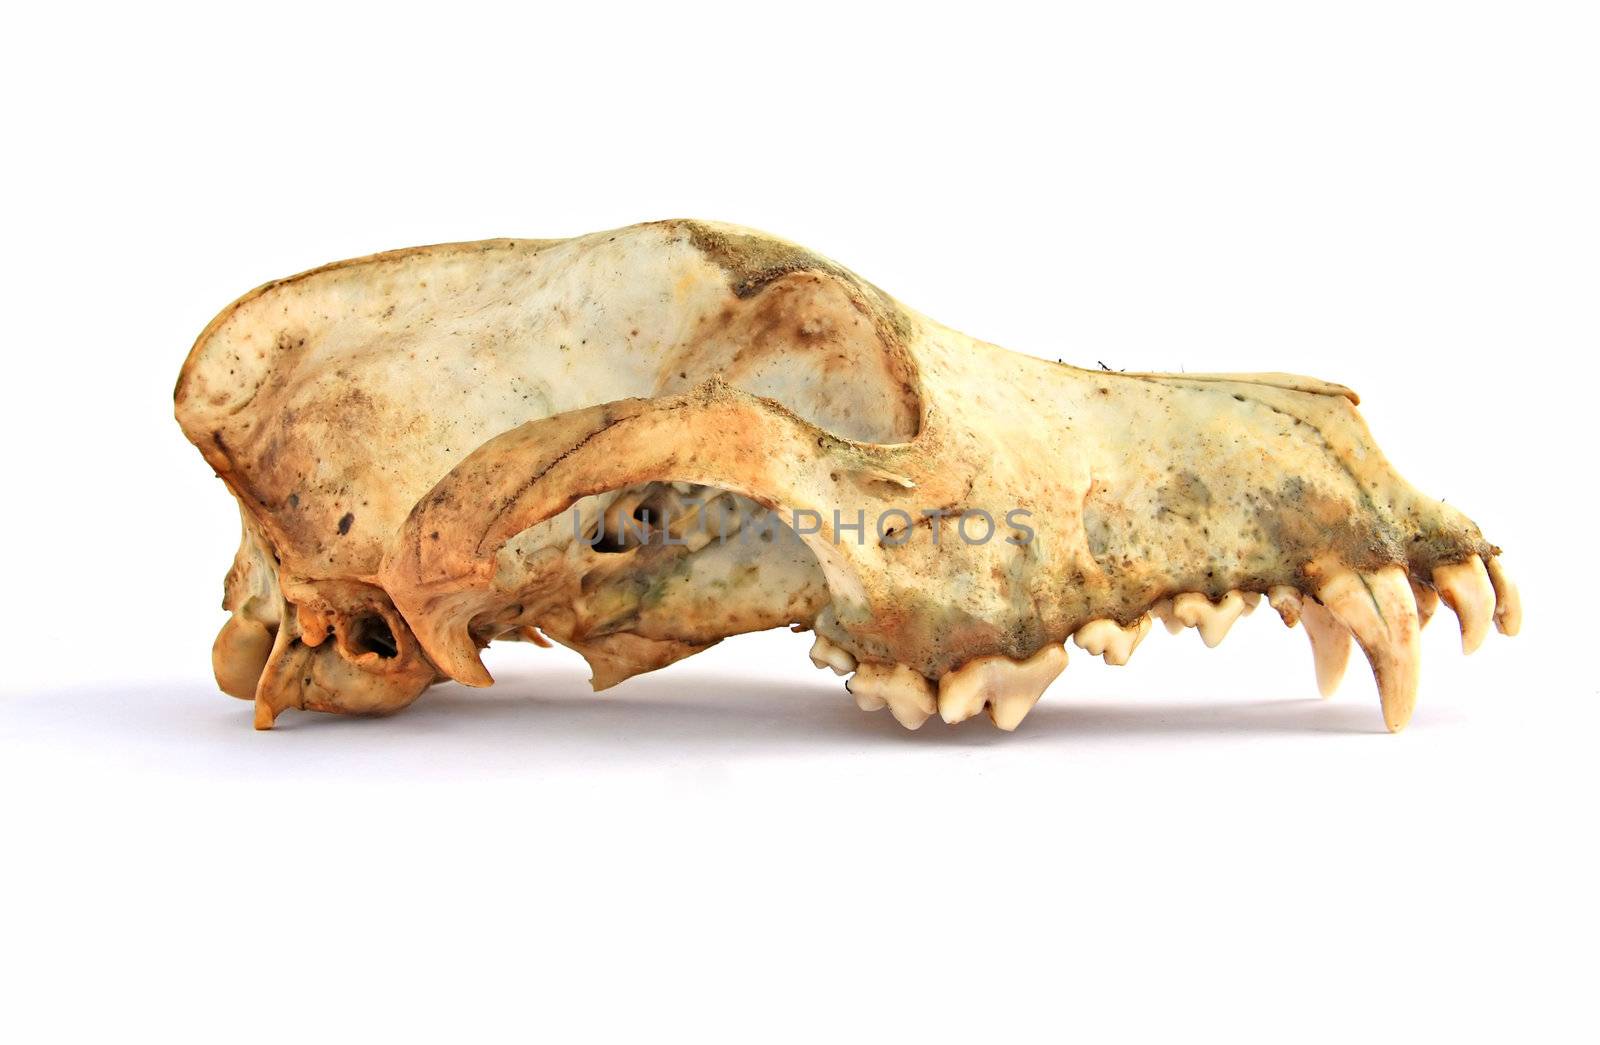 skull of the dog by basel101658